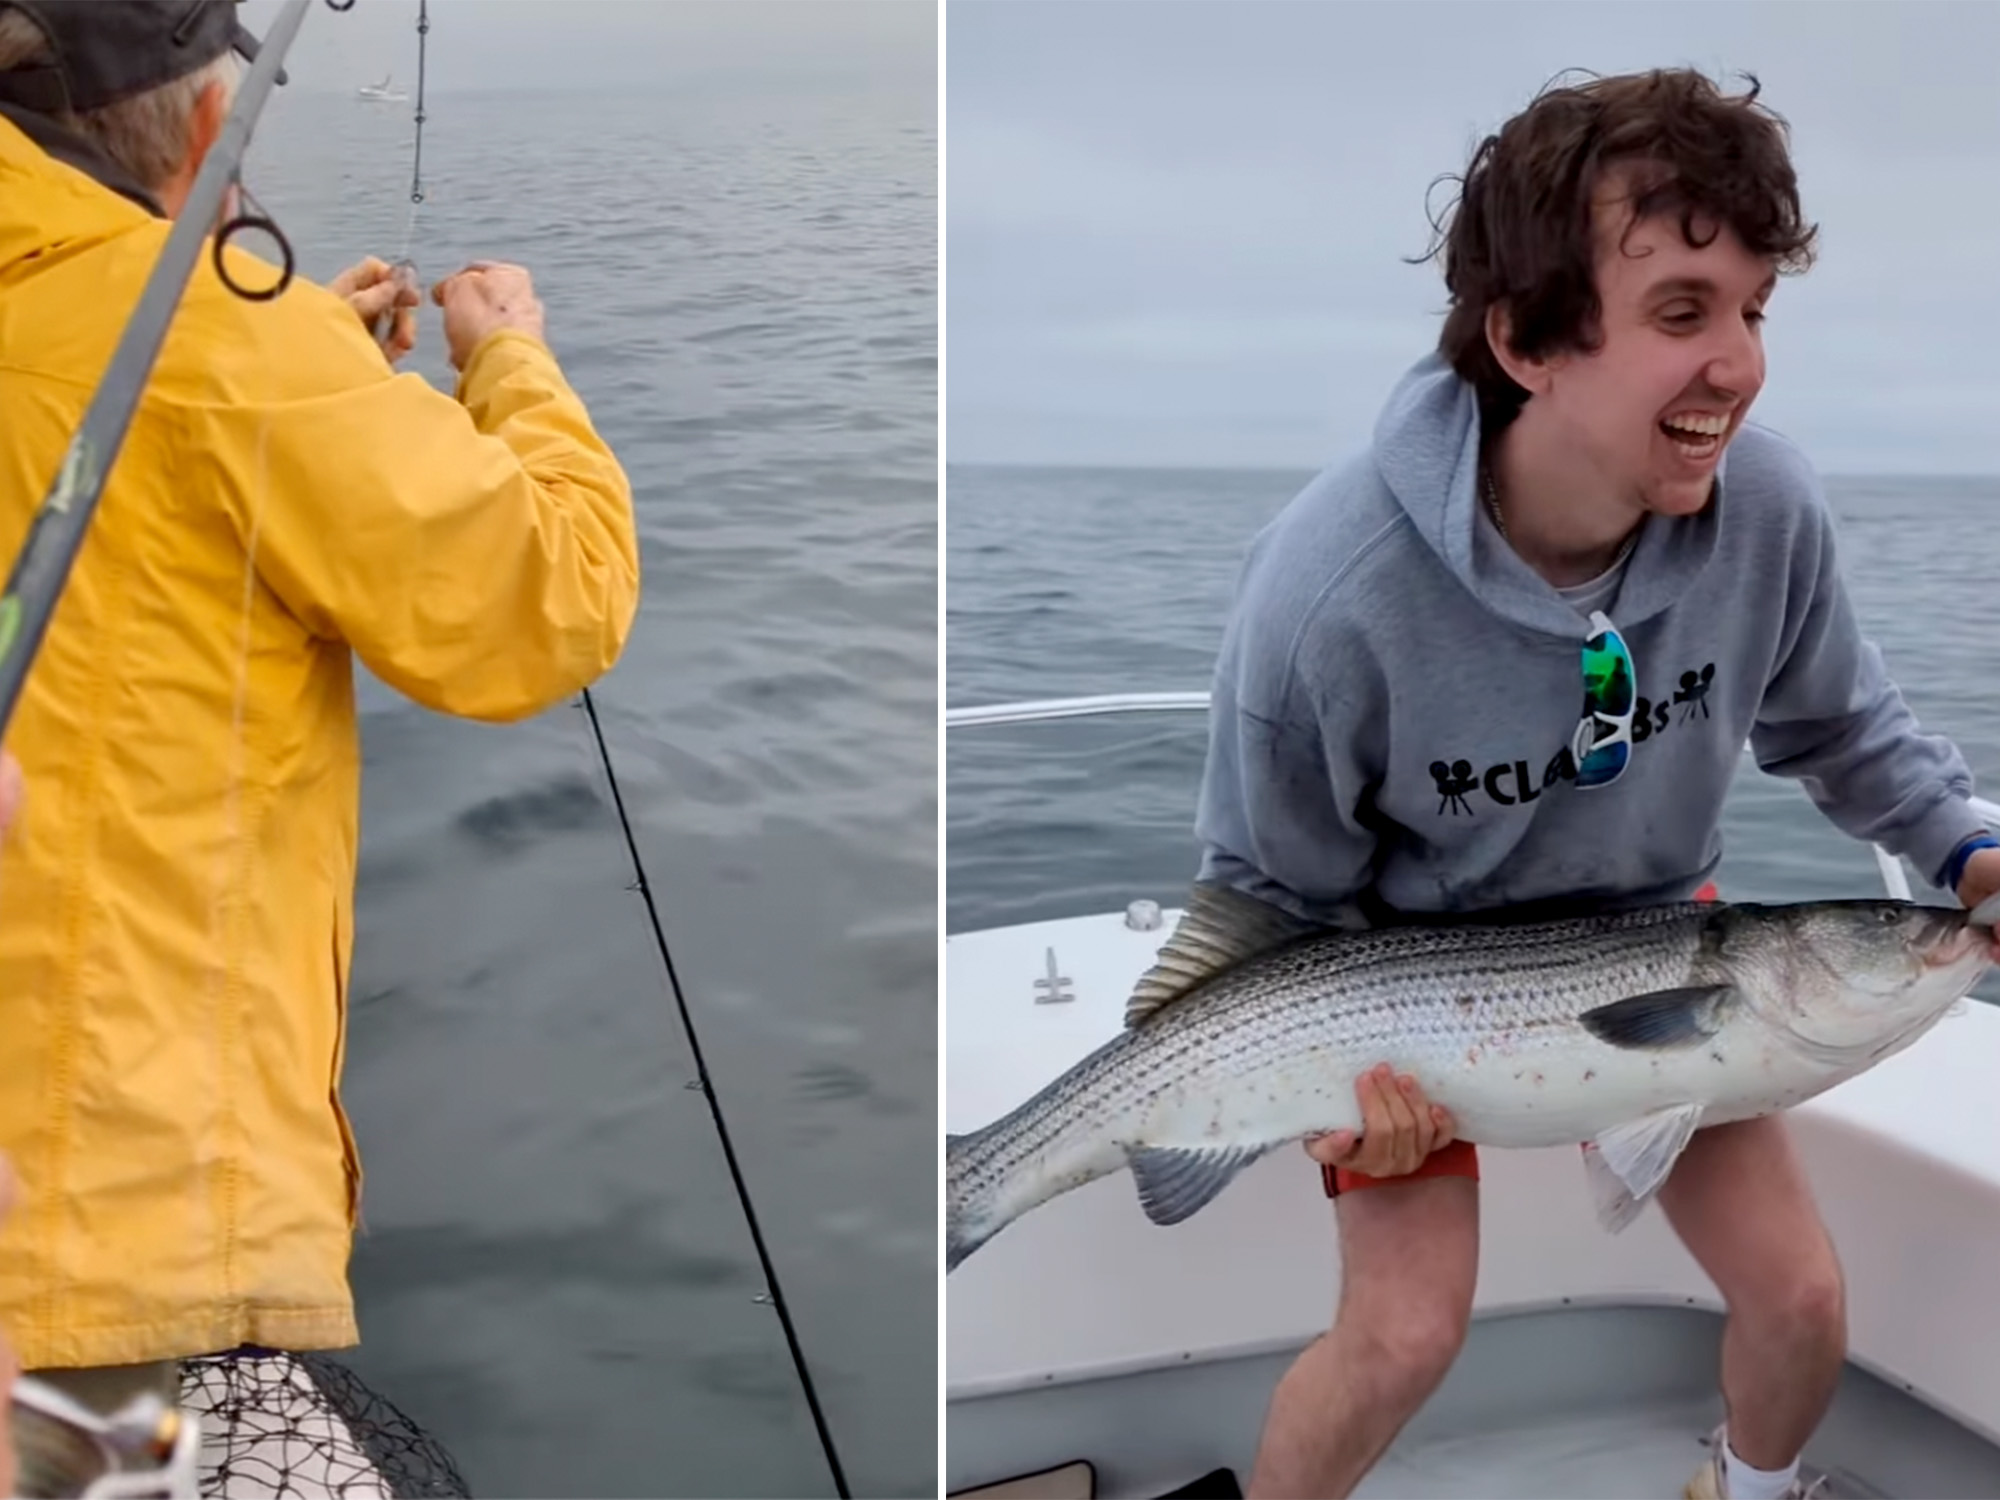 Video: Man Catches Lost Rod with a Striper Still Hooked